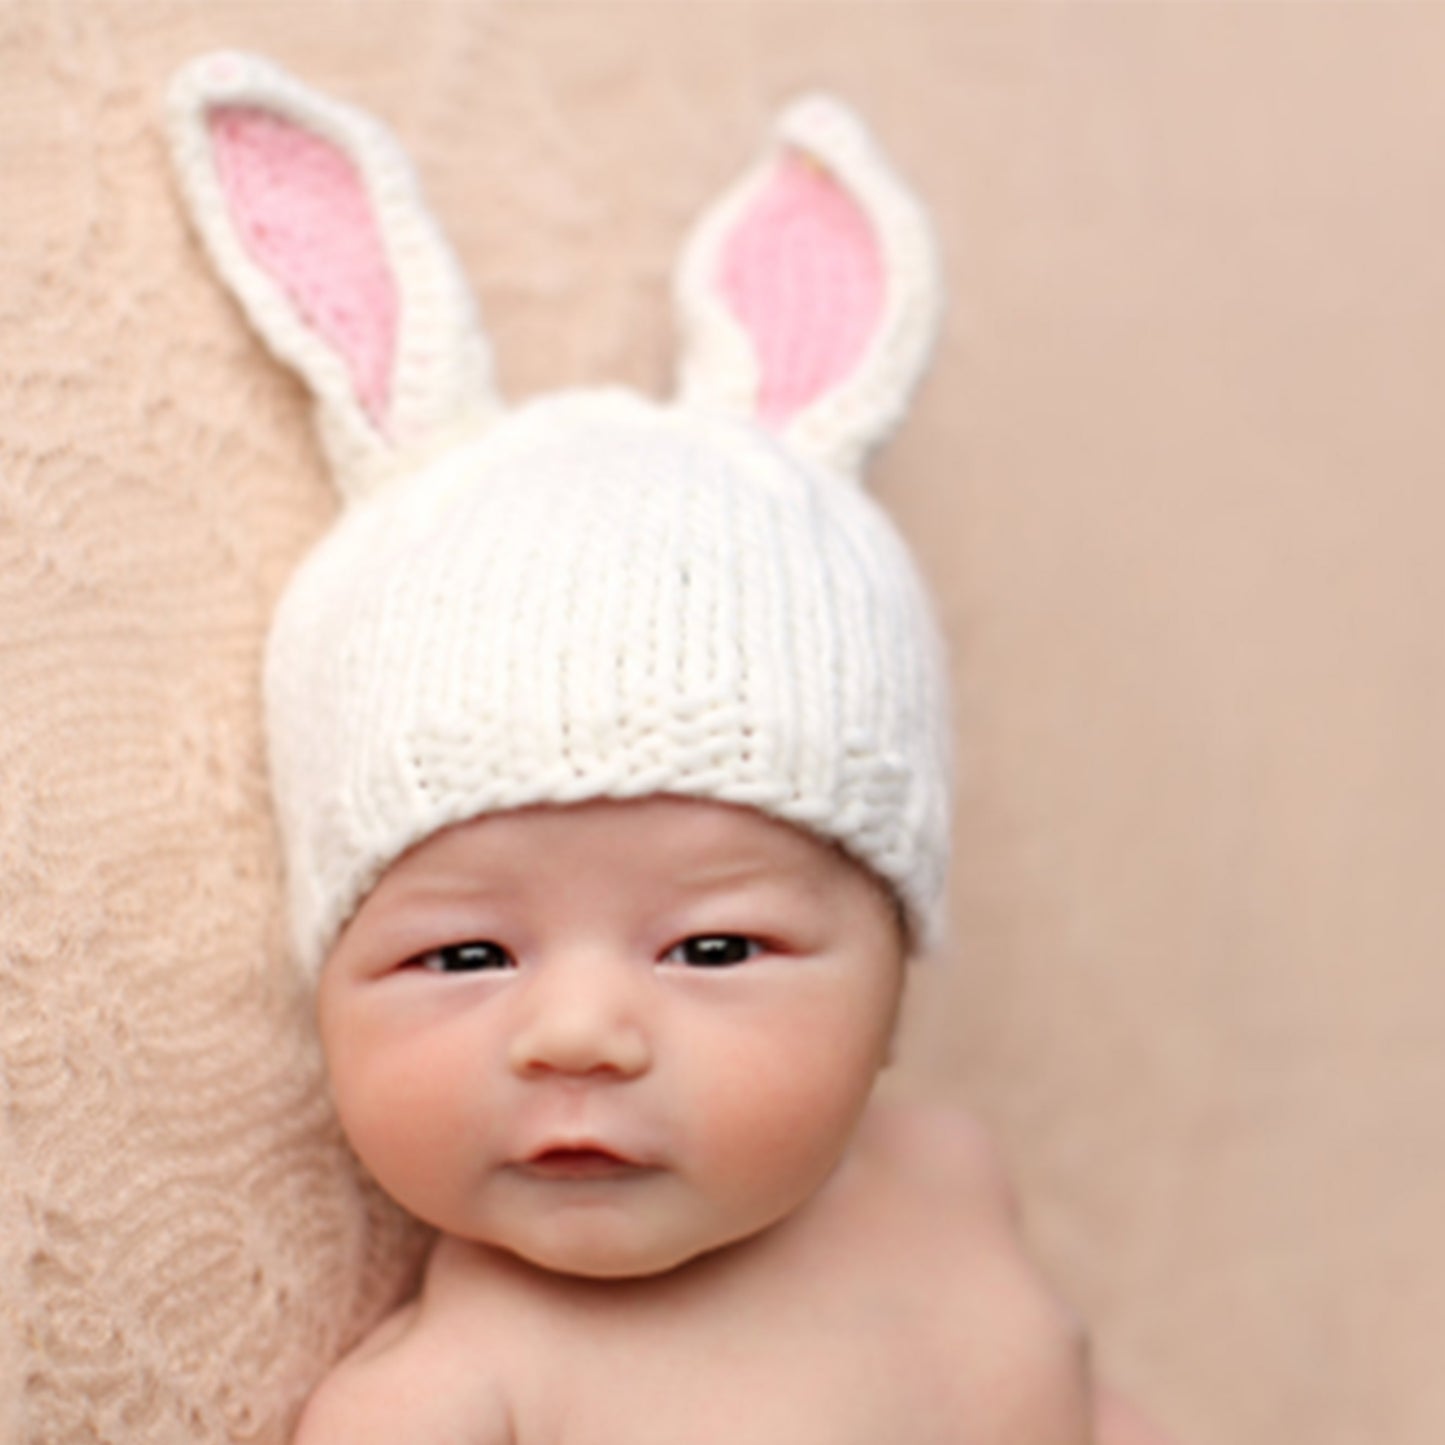 Bailey Bunny Hand-Knit Hat, White with Pink Ears